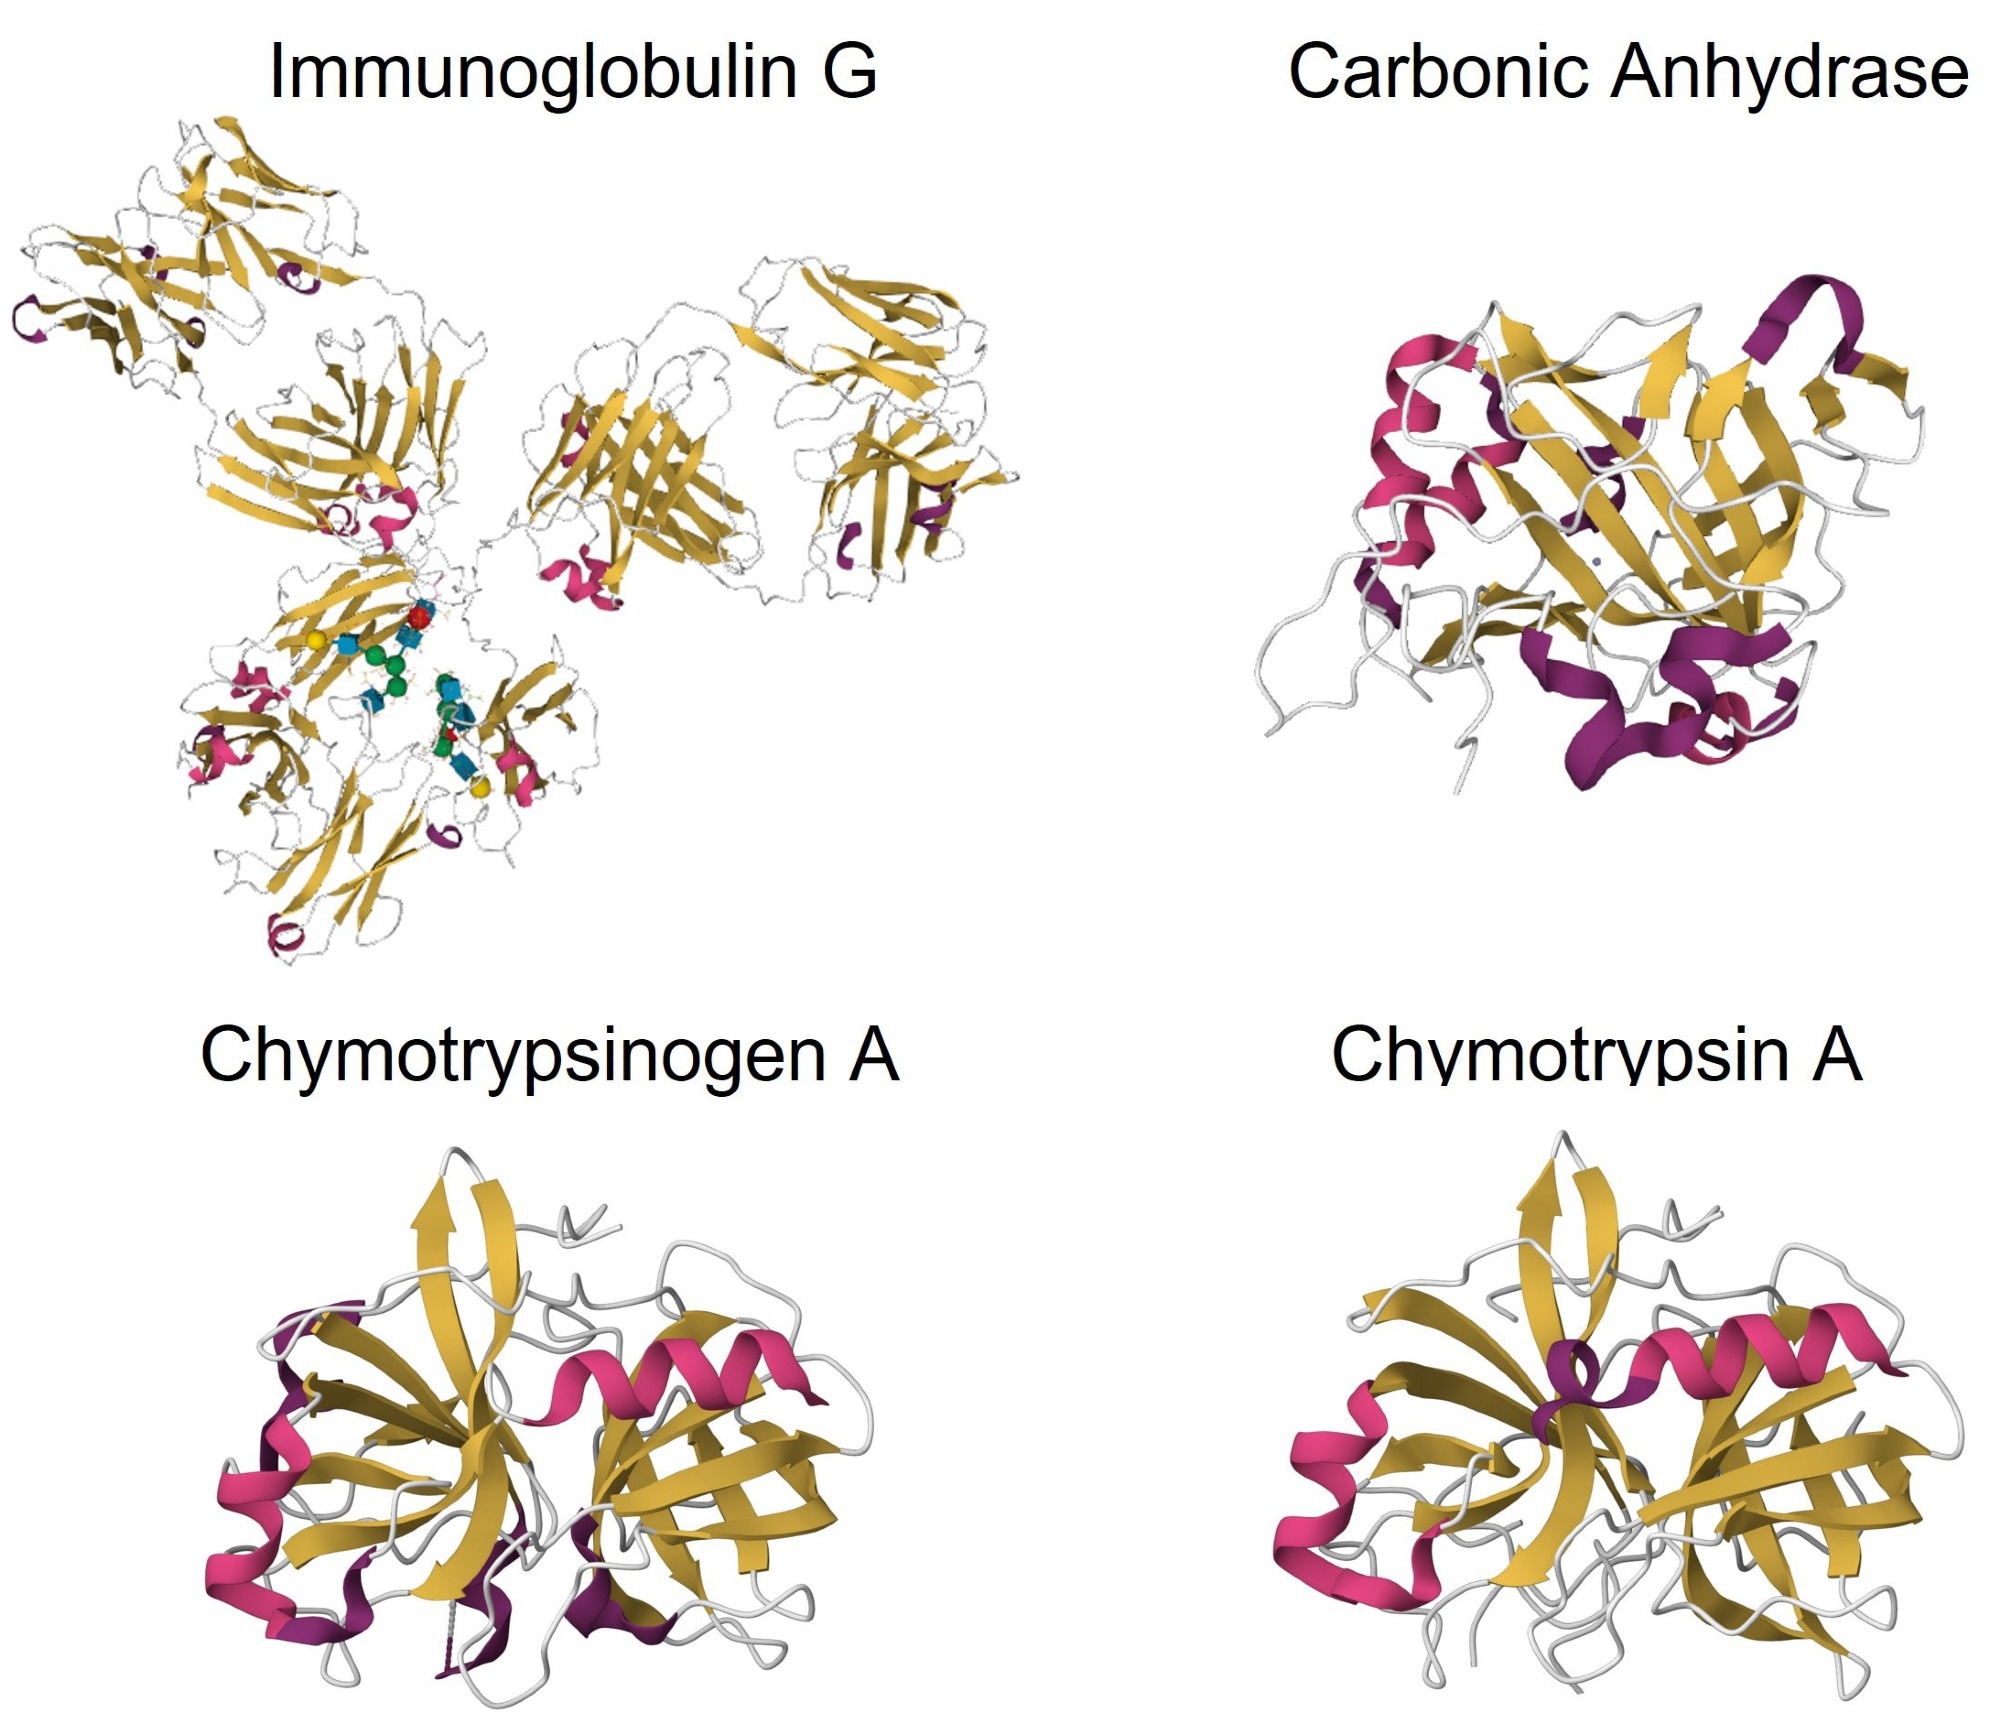 Crystal structures of β-sheet-rich proteins: IgG (PDB: 5DK3), carbonic anhydrase (PDB: 1V9E), chymotrypsinogen A (PDB: 2CGA), and chymotrypsin A (PDB: 4CHA).